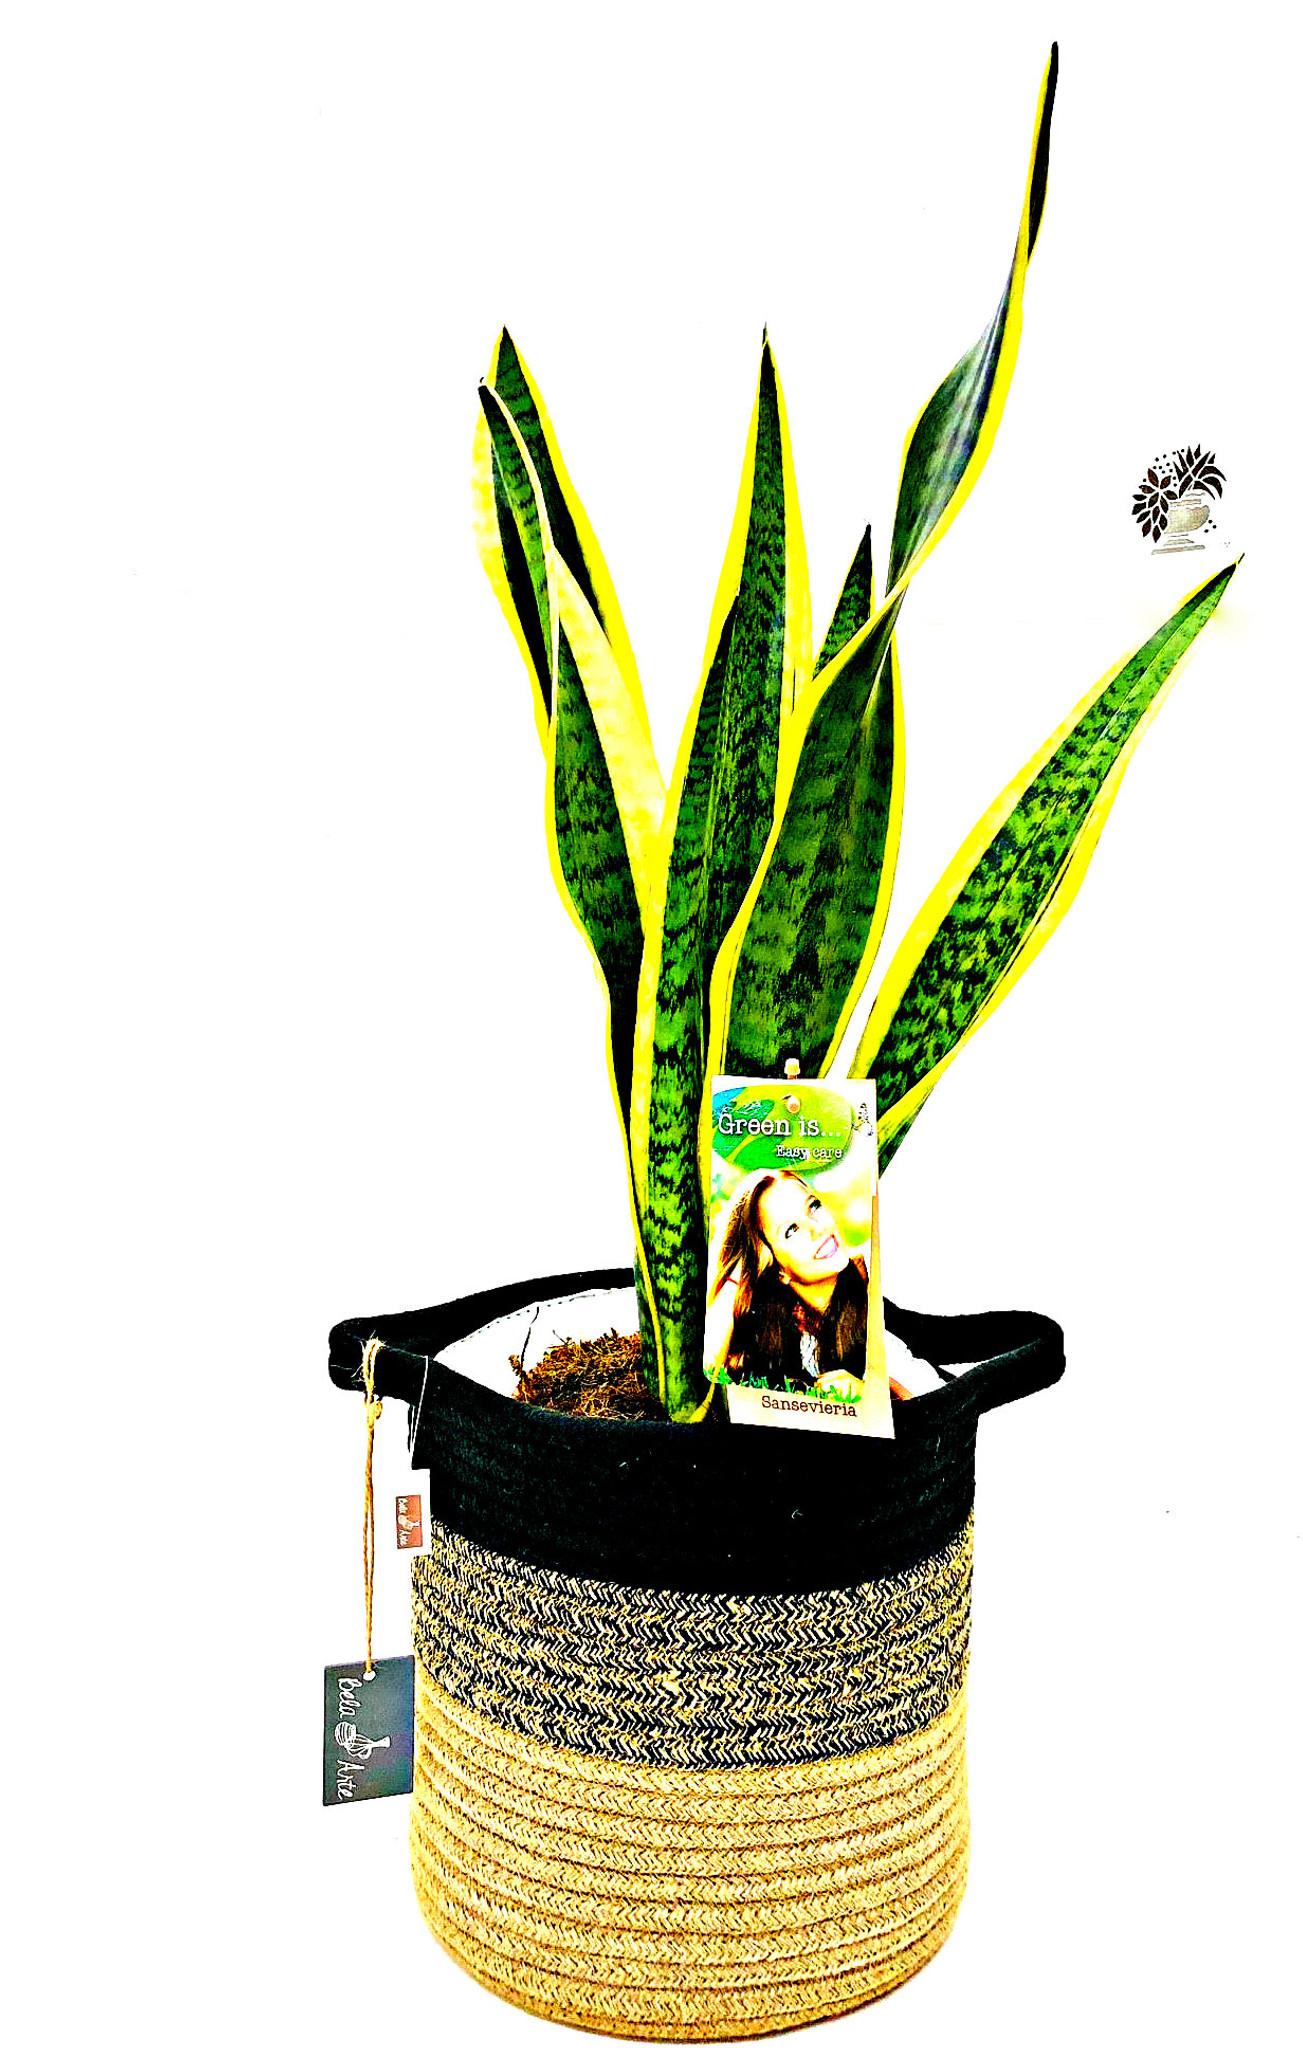 Other options:  Large Mother's in law plant, sansevieria Planted in a white white basket with  waterproof liner sawed. Order online to any address fast delivery options.